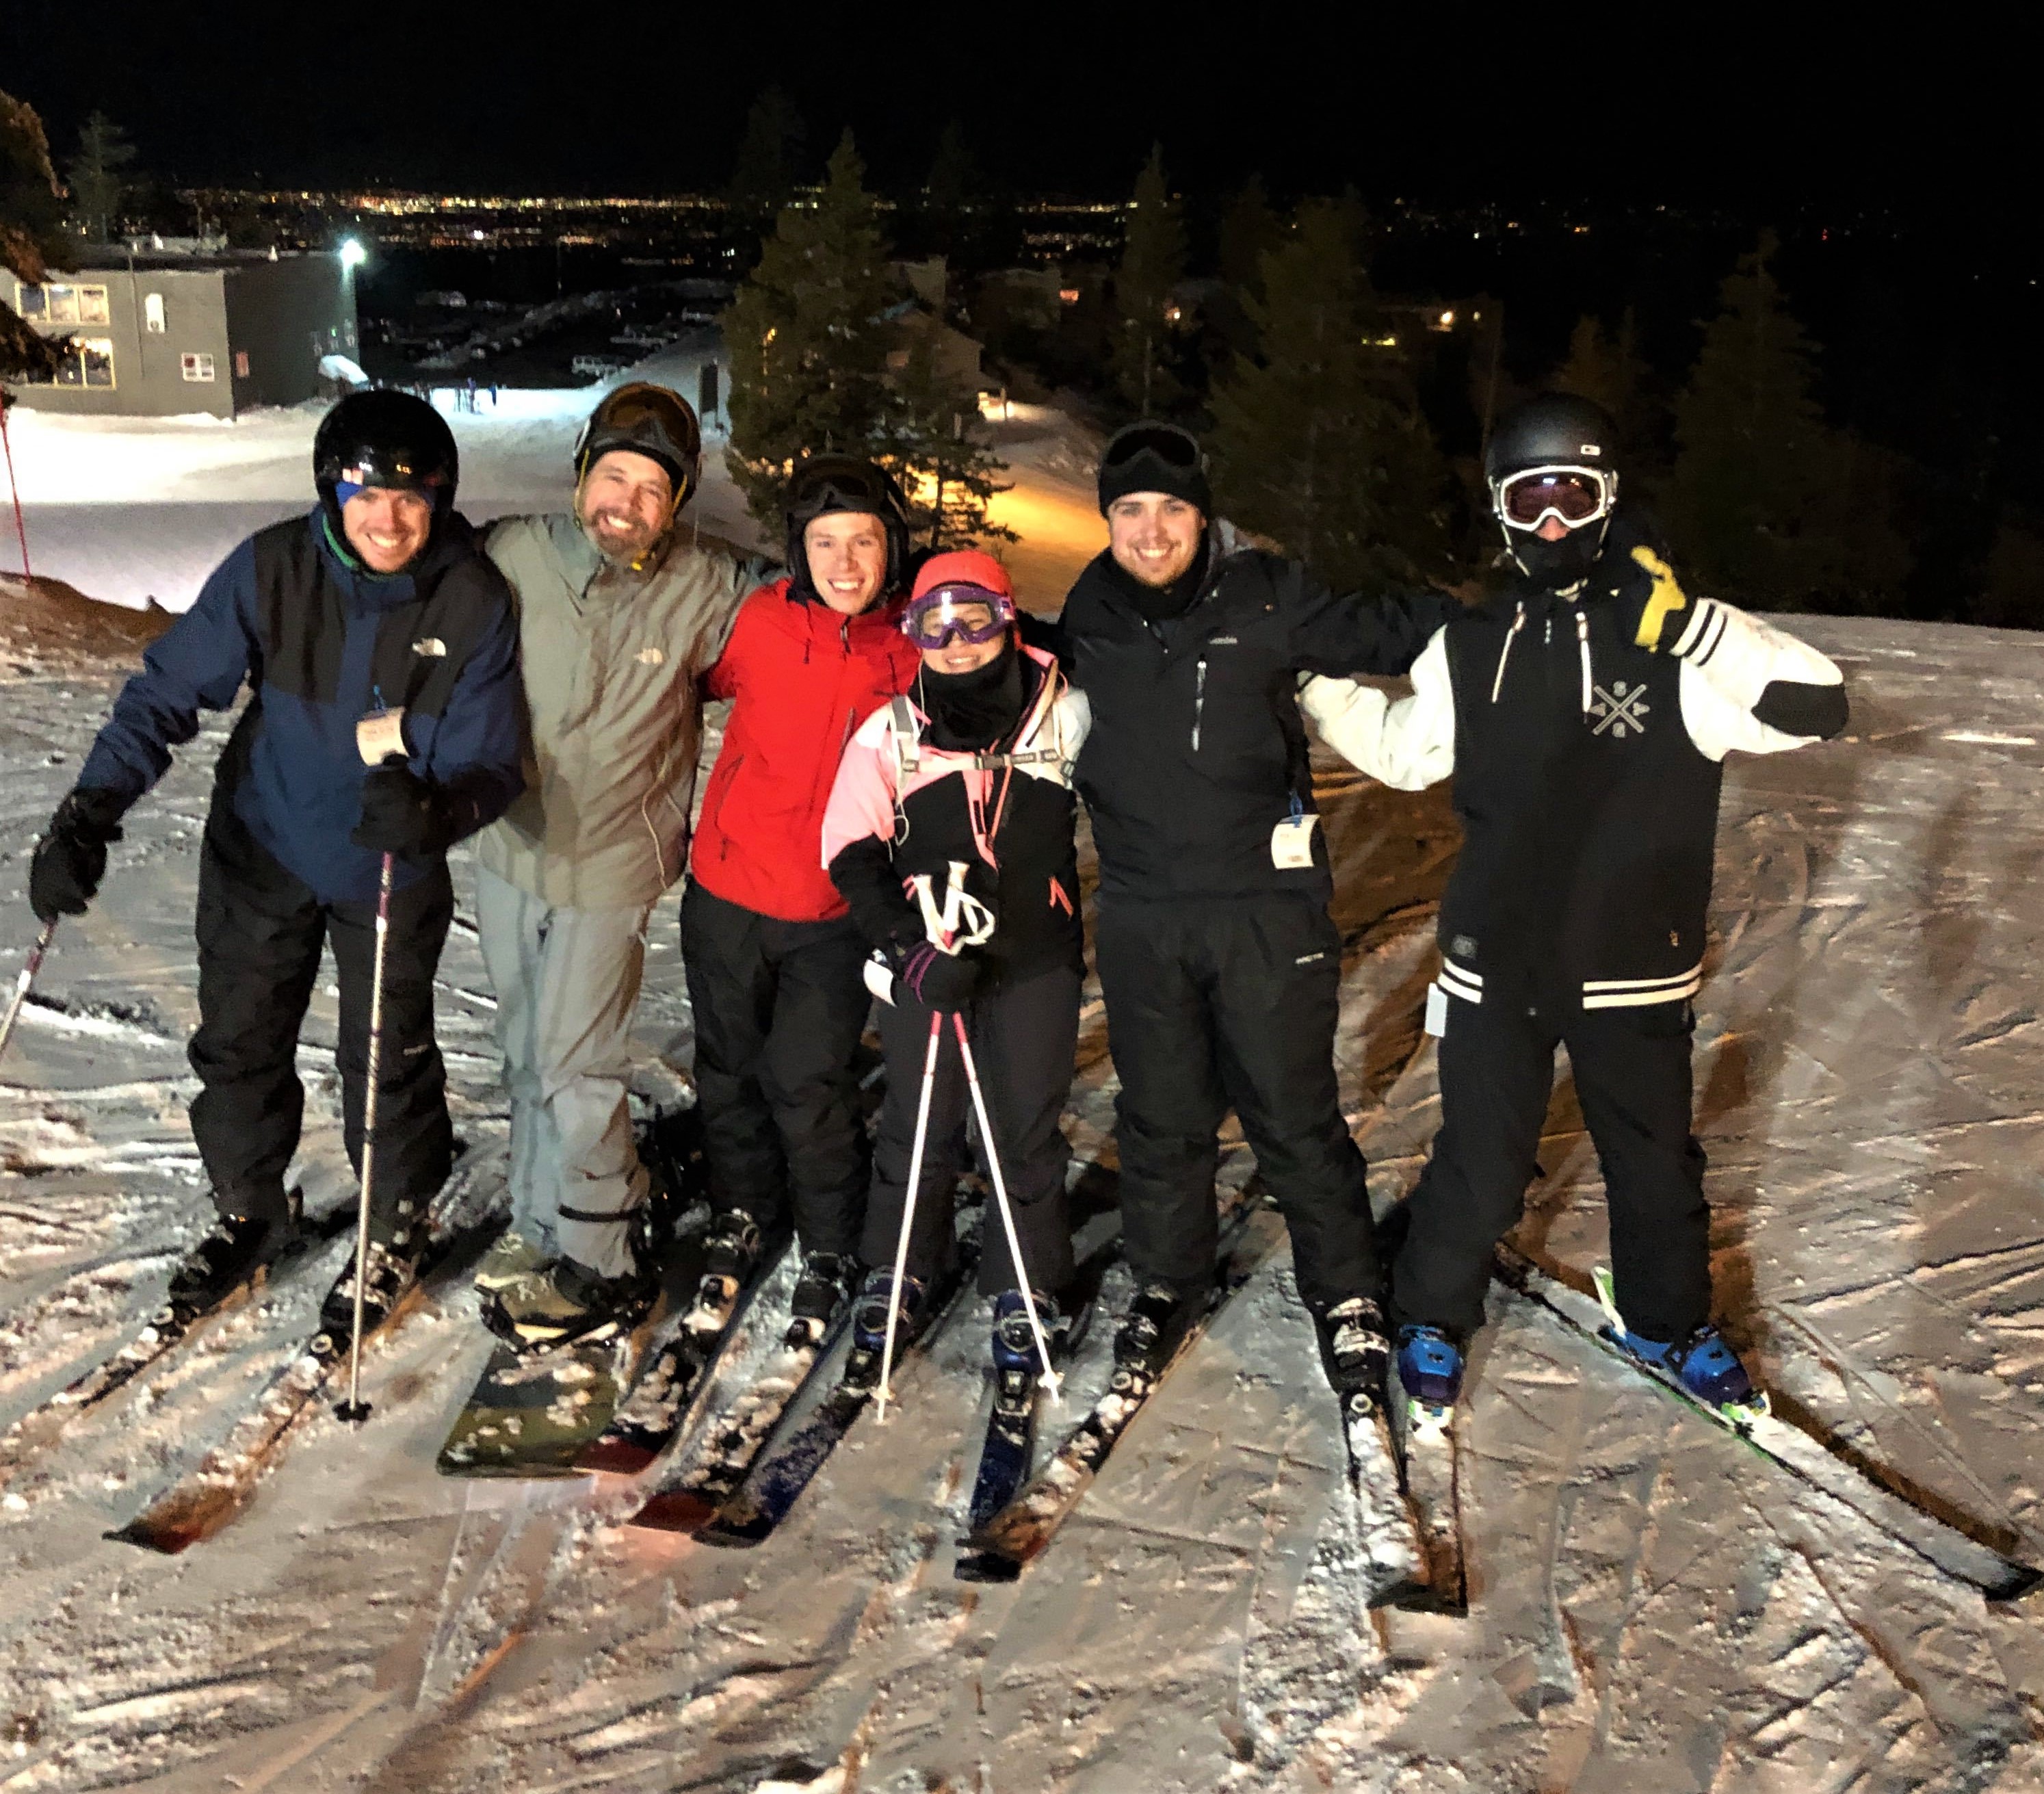 six people on skis and snowboard in snow